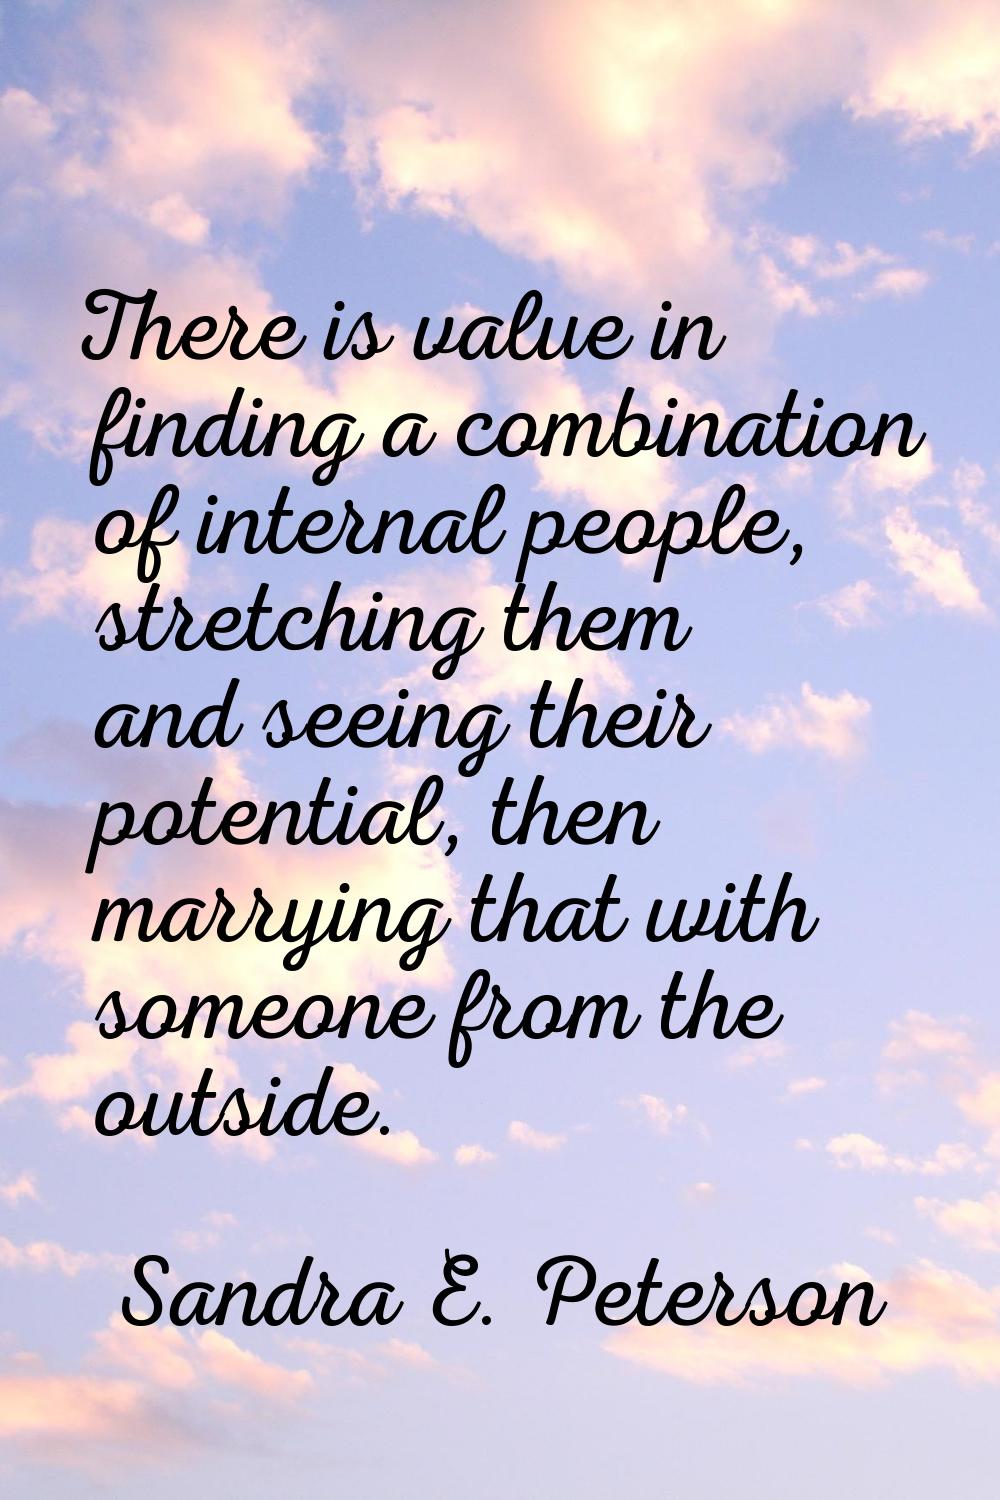 There is value in finding a combination of internal people, stretching them and seeing their potent